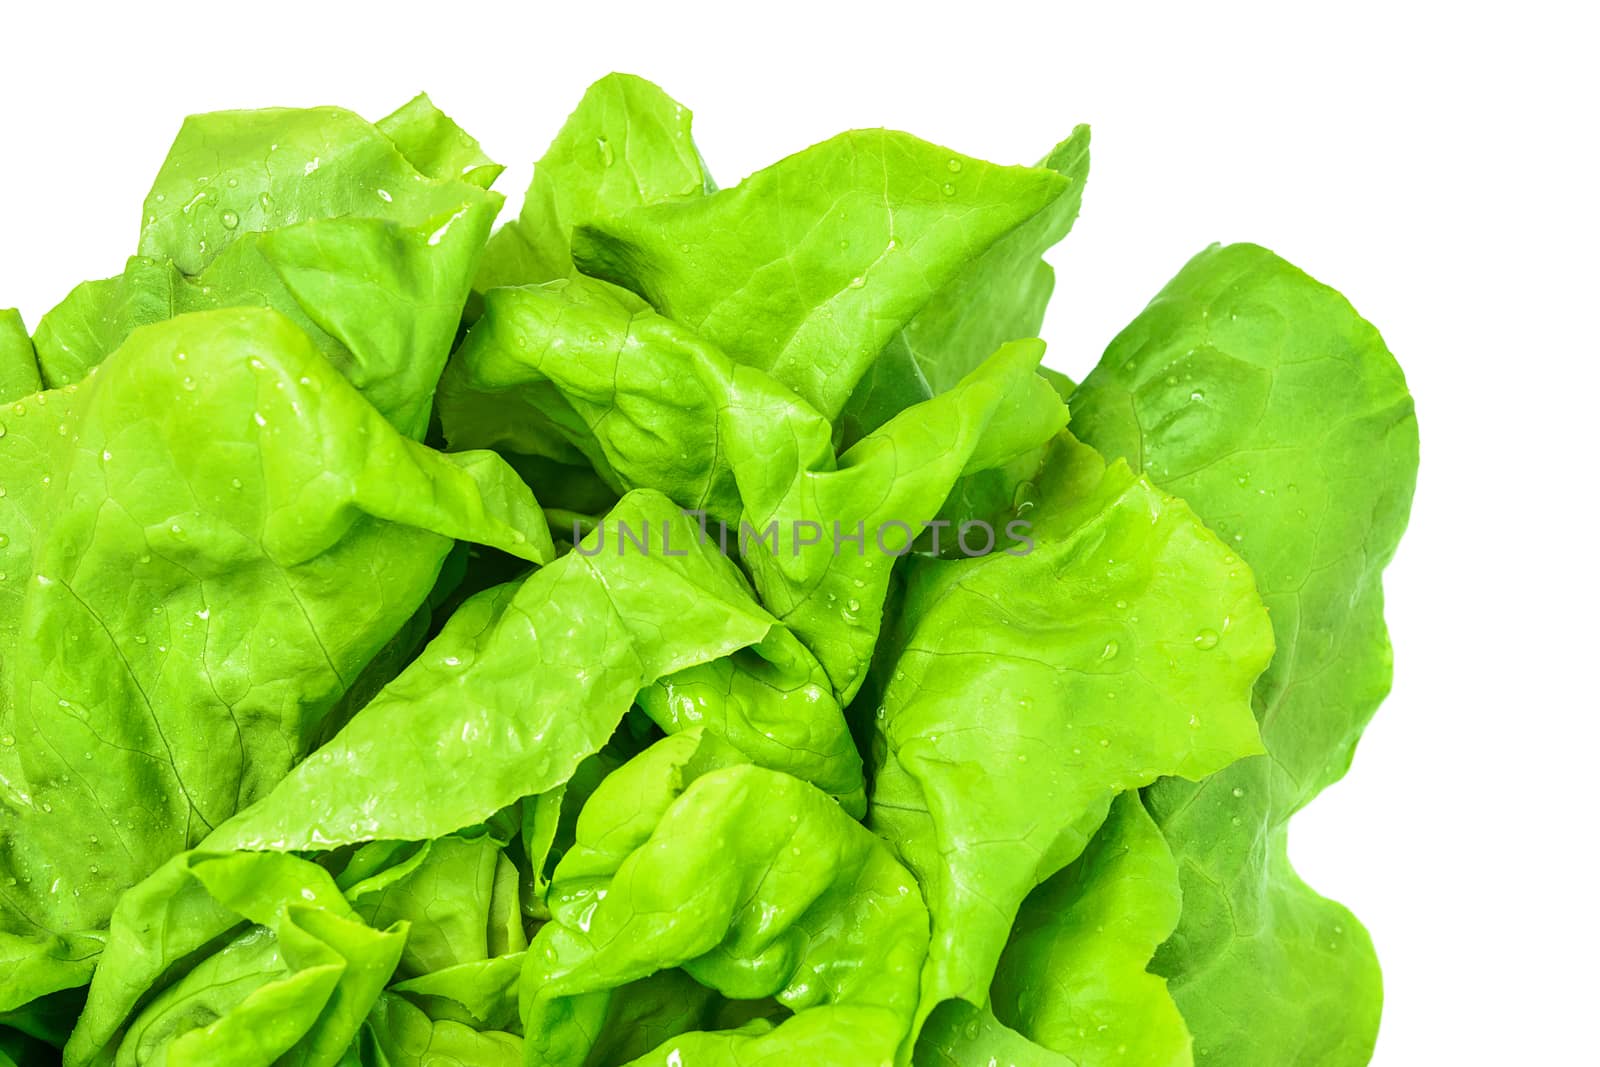 Top view of a fresh and green lettuce with water drops on a white background in close-up (high details).